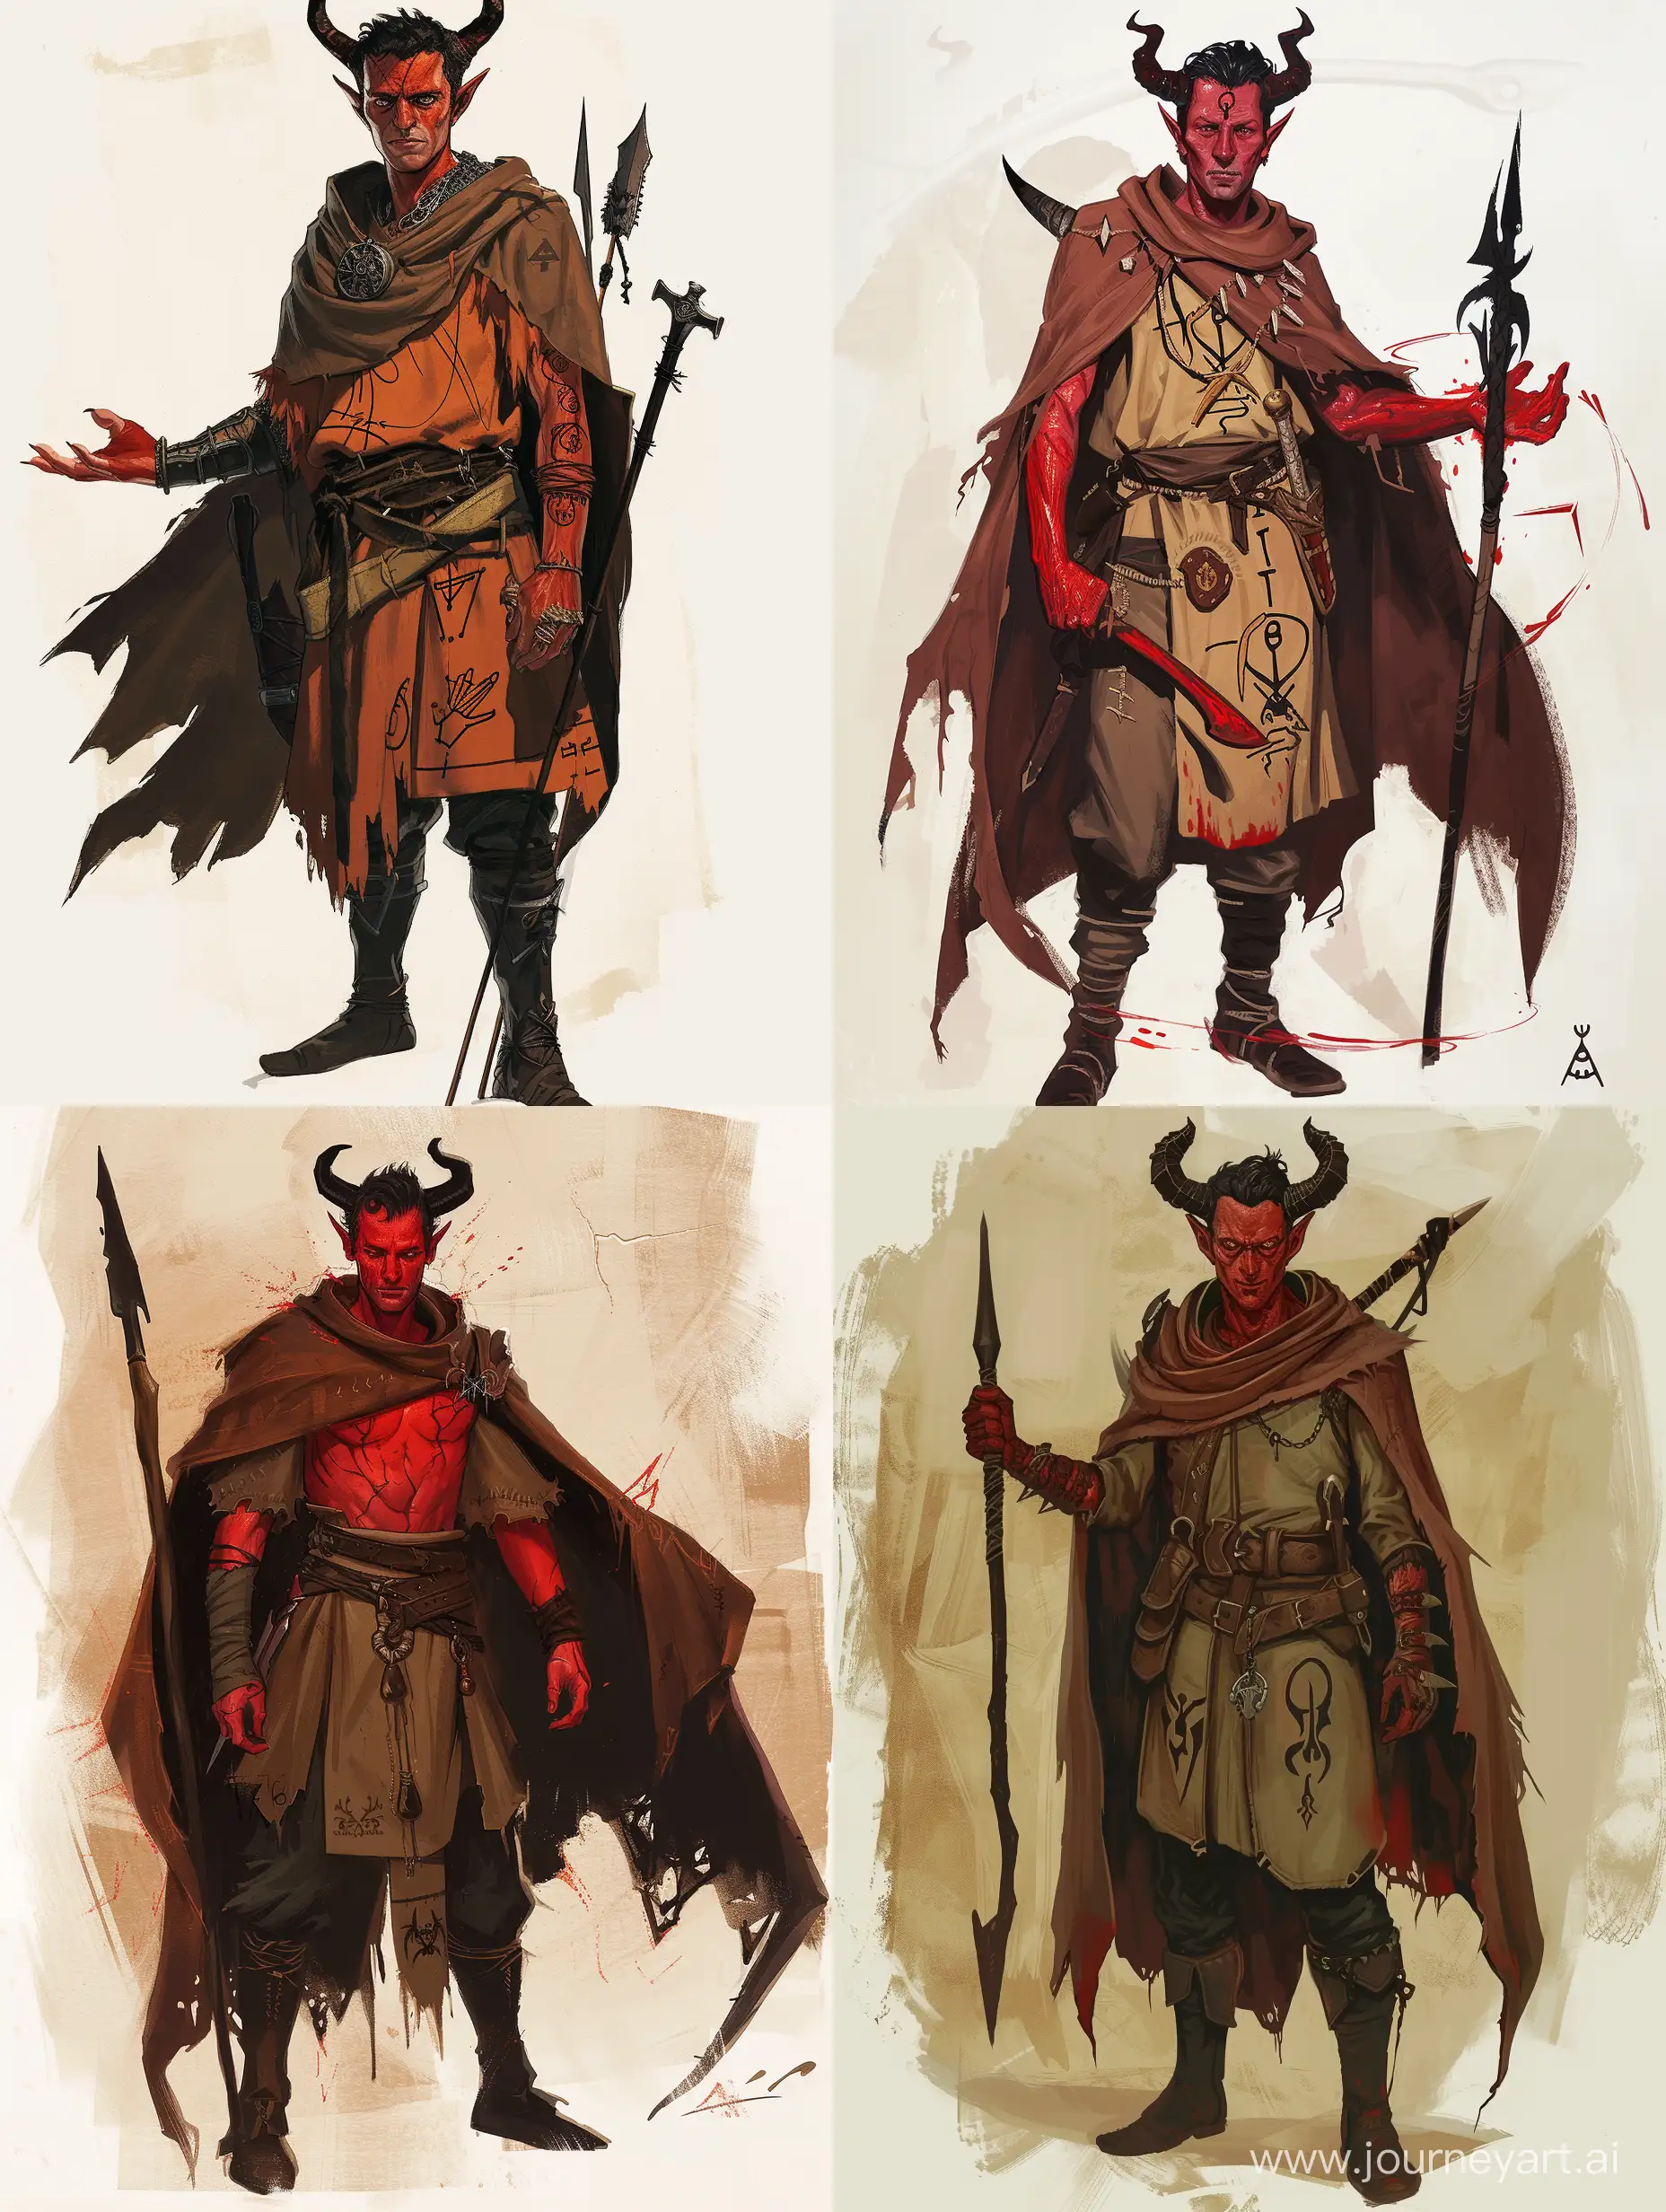 Draw a character from the Dungeons and Dragons universe according to the following description:
They are a demon from the village, red skin, 170 centimeters tall, horns, slim build, dark hair, brown cape.
A cultist who became an apostle of the blood demon . The mark of the contract is in the eye.  The outlines of cultists are painted on his hands. The equipment includes an amulet inherited from his father, which contains secret energy, a family dagger and a spear on his back.